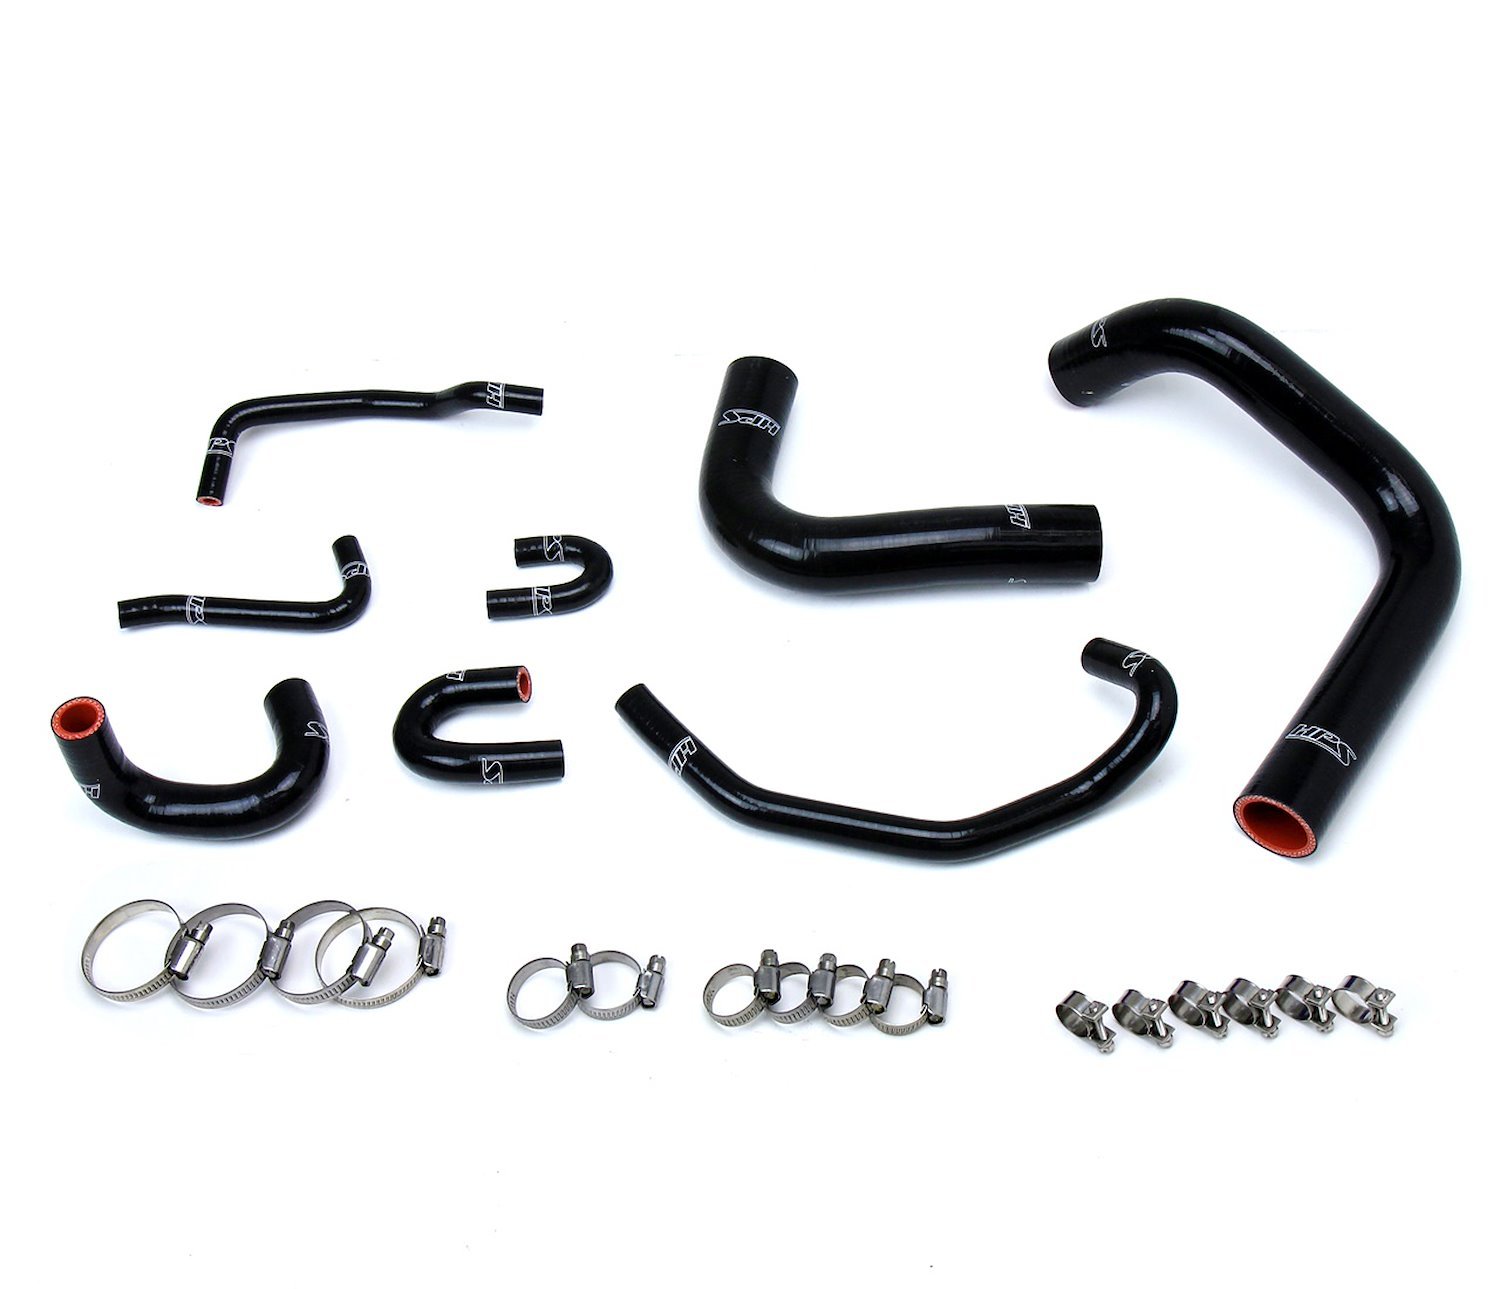 57-1323R-BLK Radiator Hose Kit, High-Temp 3-Ply Reinforced Silicone, Replace OEM Rubber Radiator Coolant Hoses